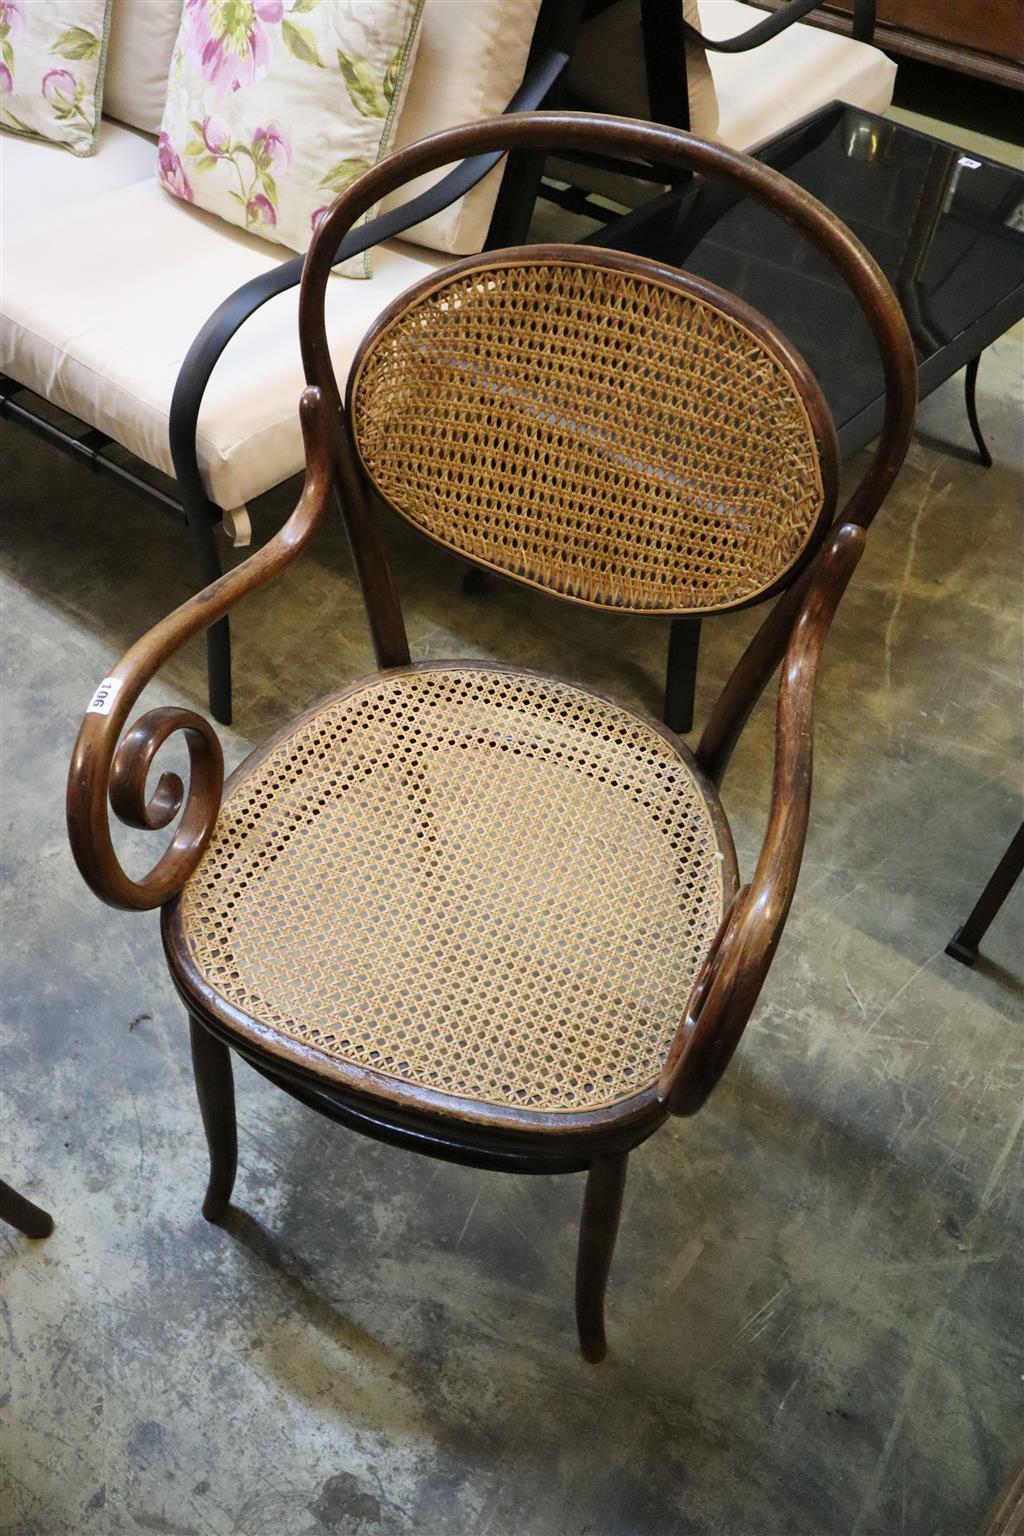 An early 20th century caned bentwood elbow chair